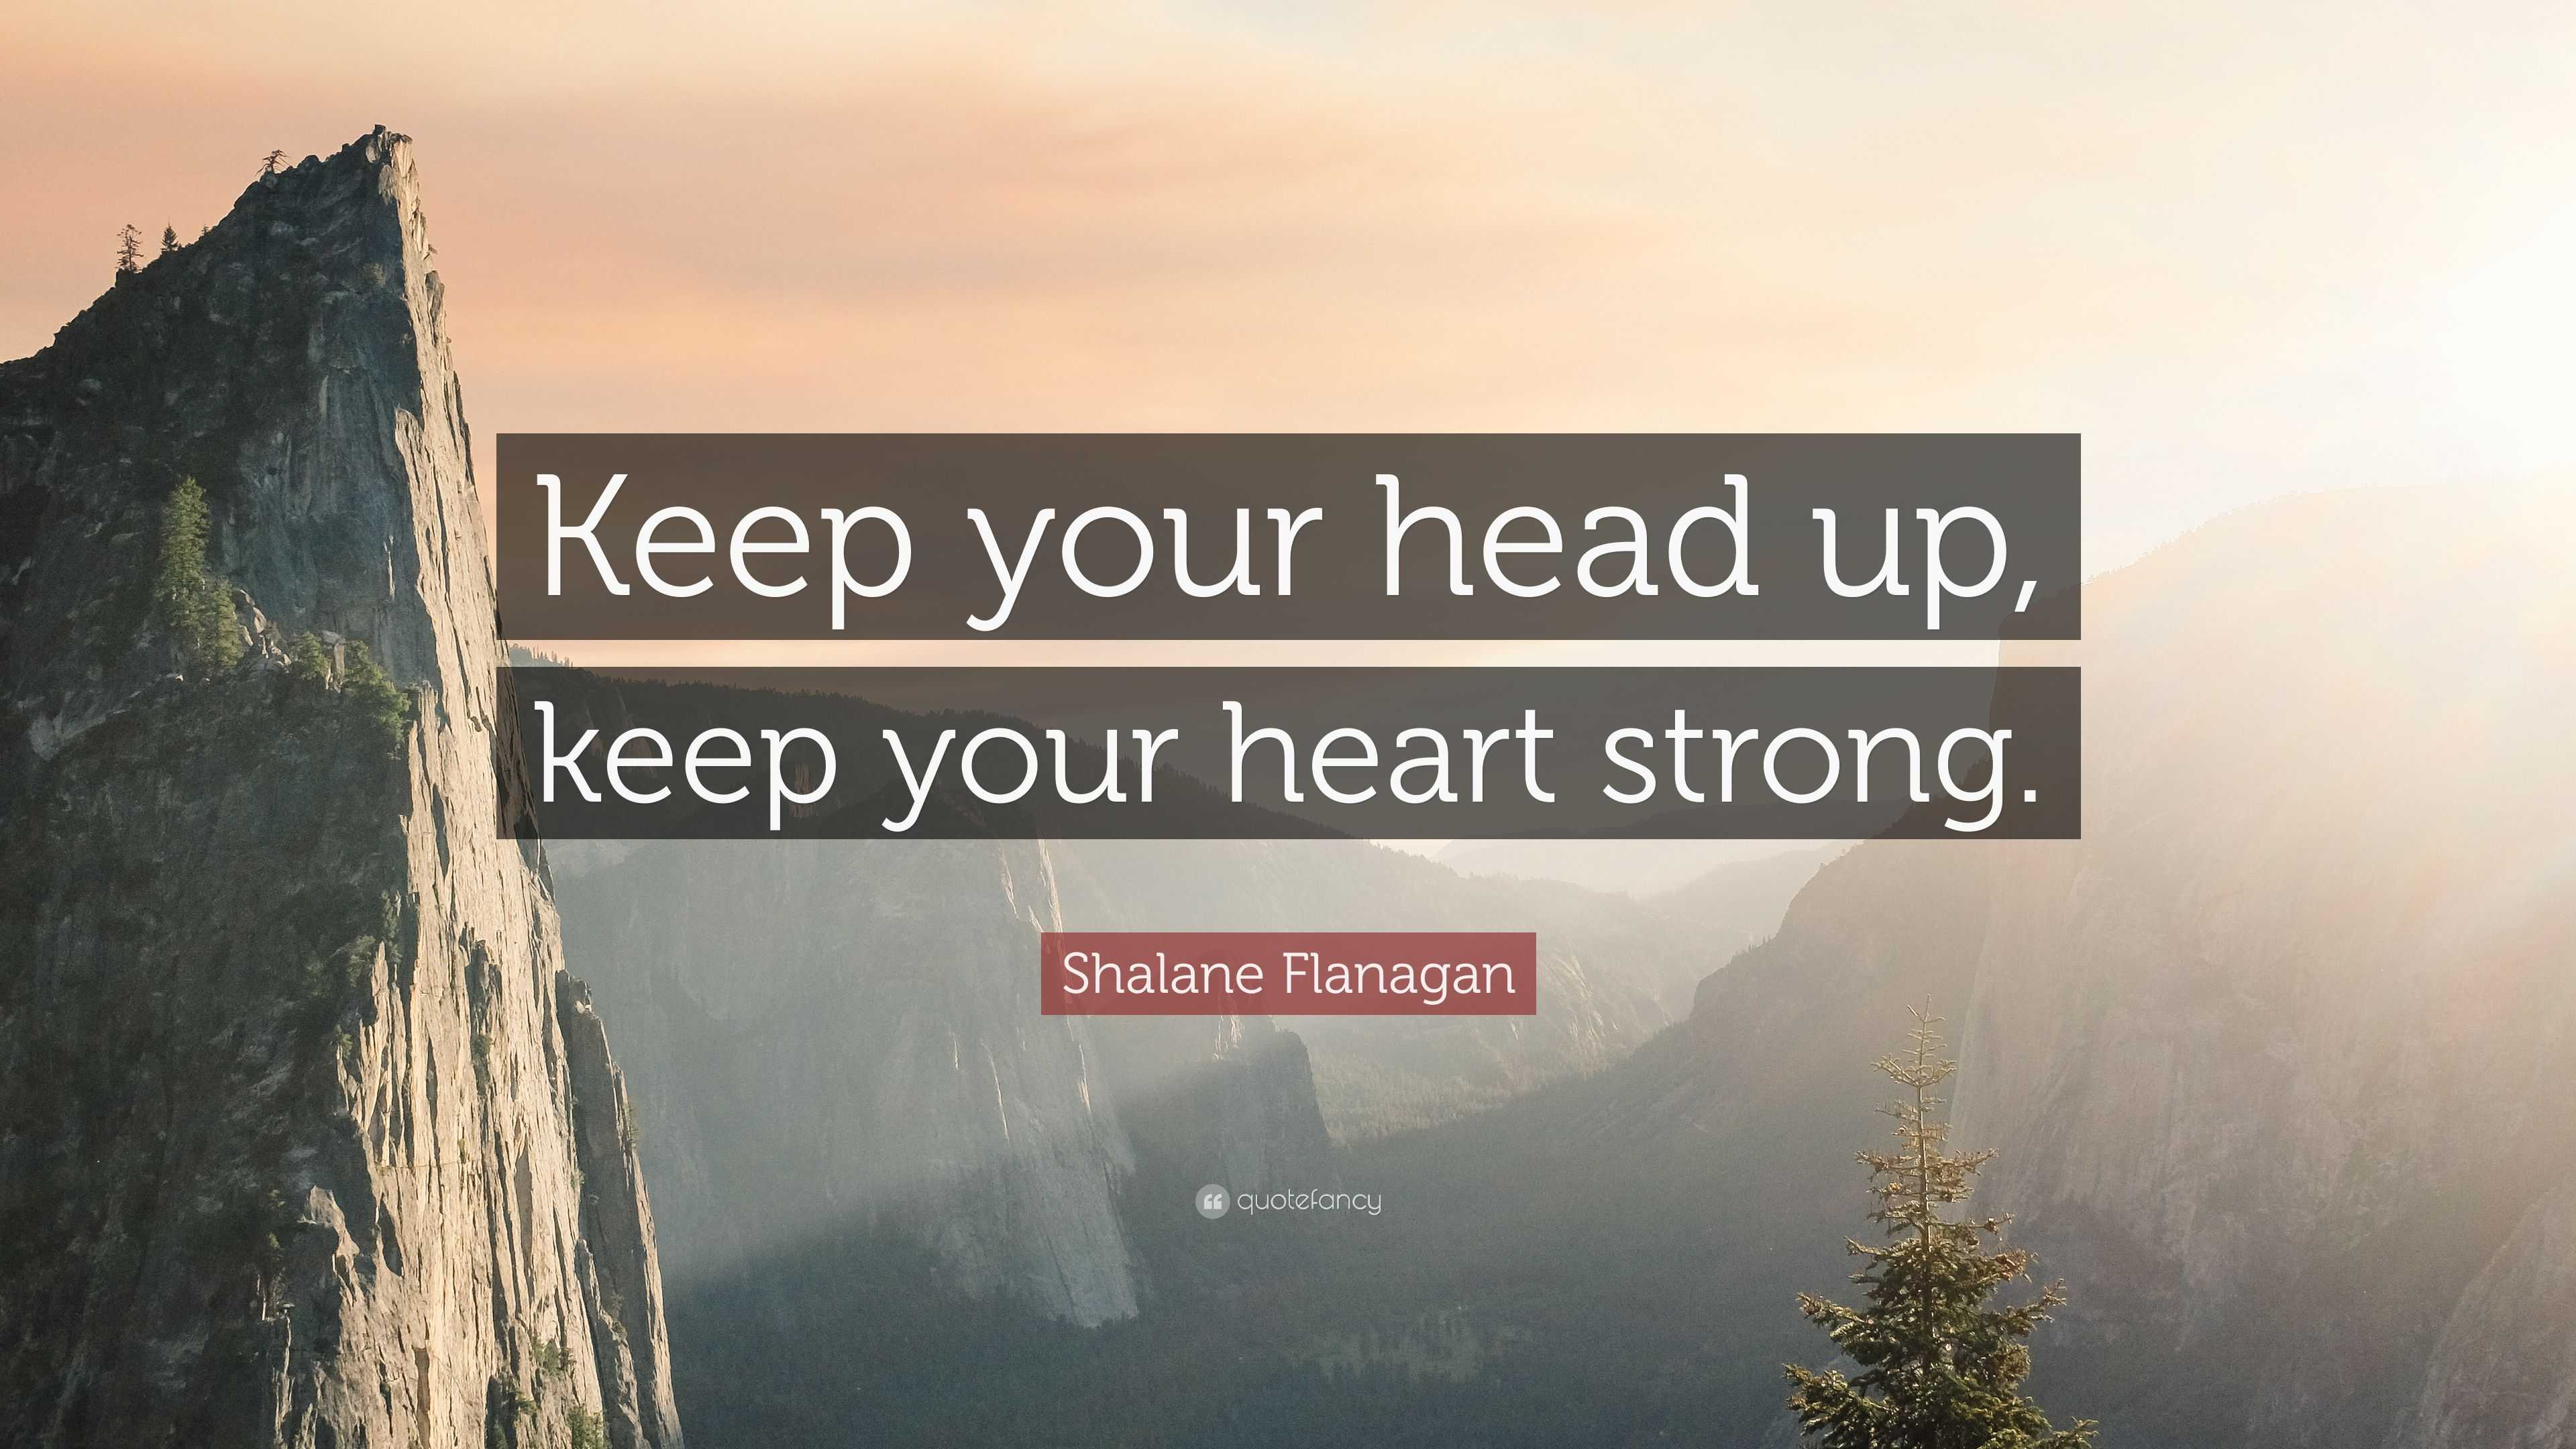 Shalane Flanagan Quote: “Keep your head up, keep your heart strong.”